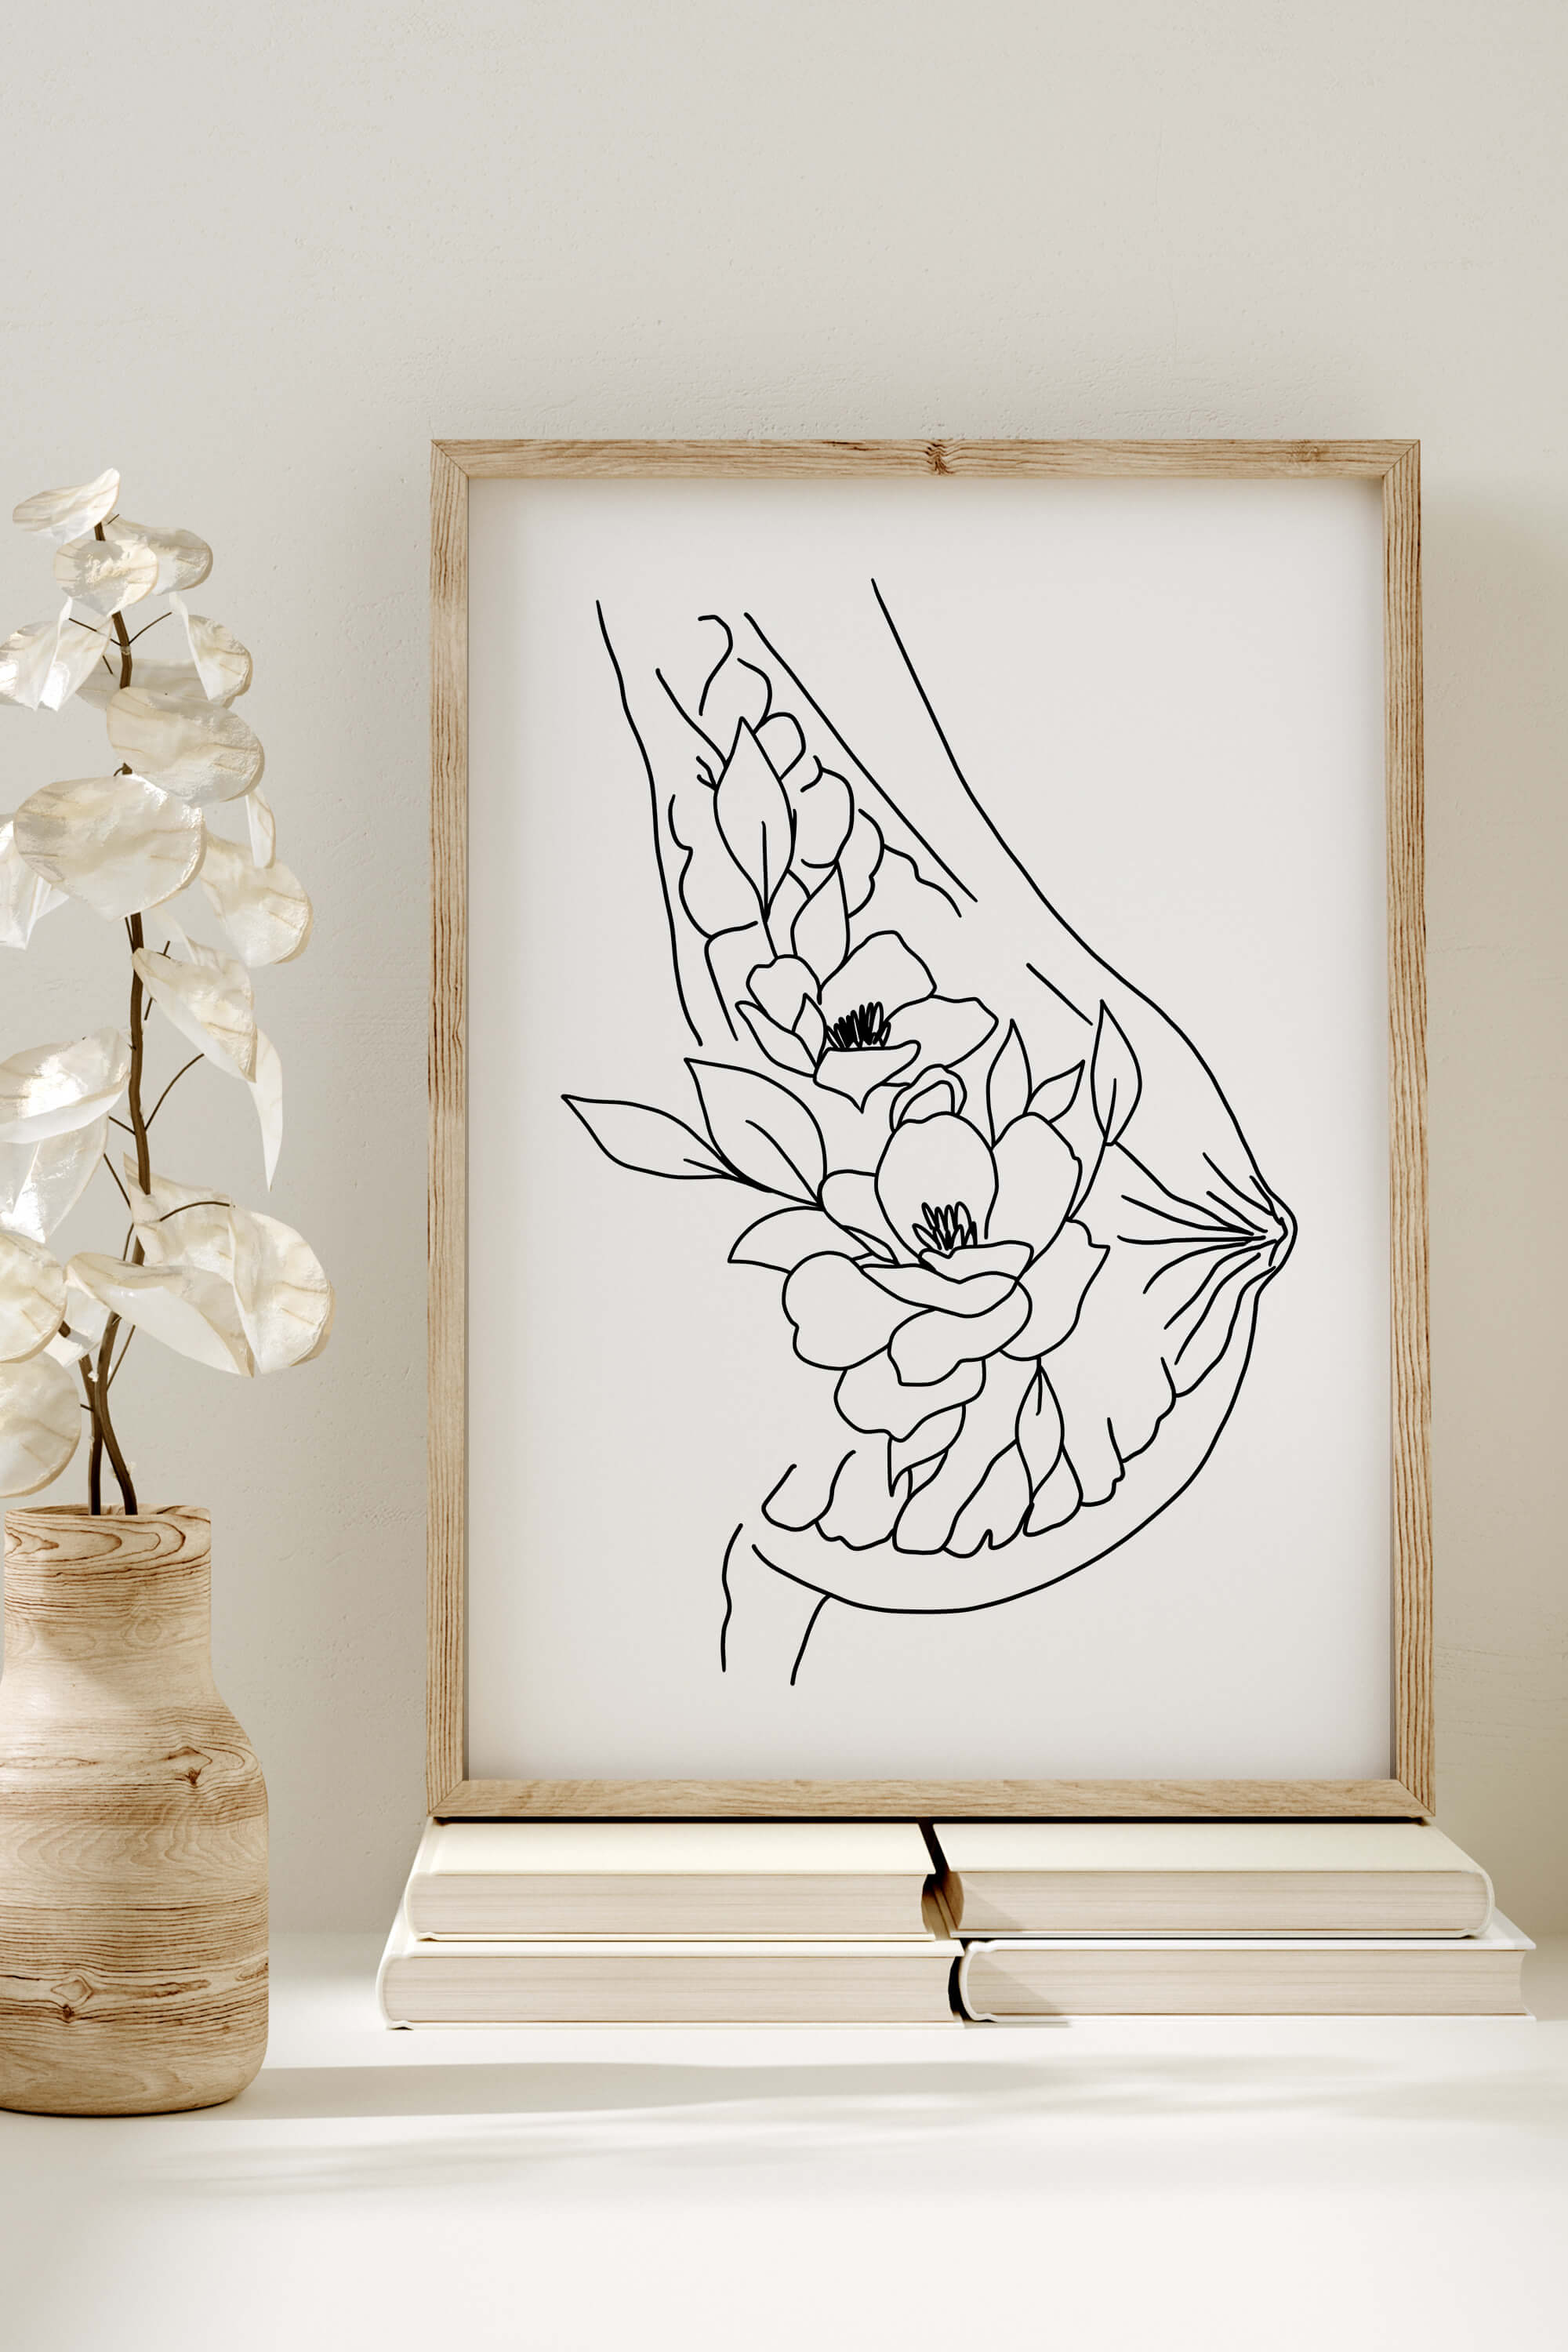 Floral anatomical art poster – a heartfelt gift for cancer survivors and healthcare professionals. Express support through the empowering symbolism and vibrant colors of this unique body positivity print.